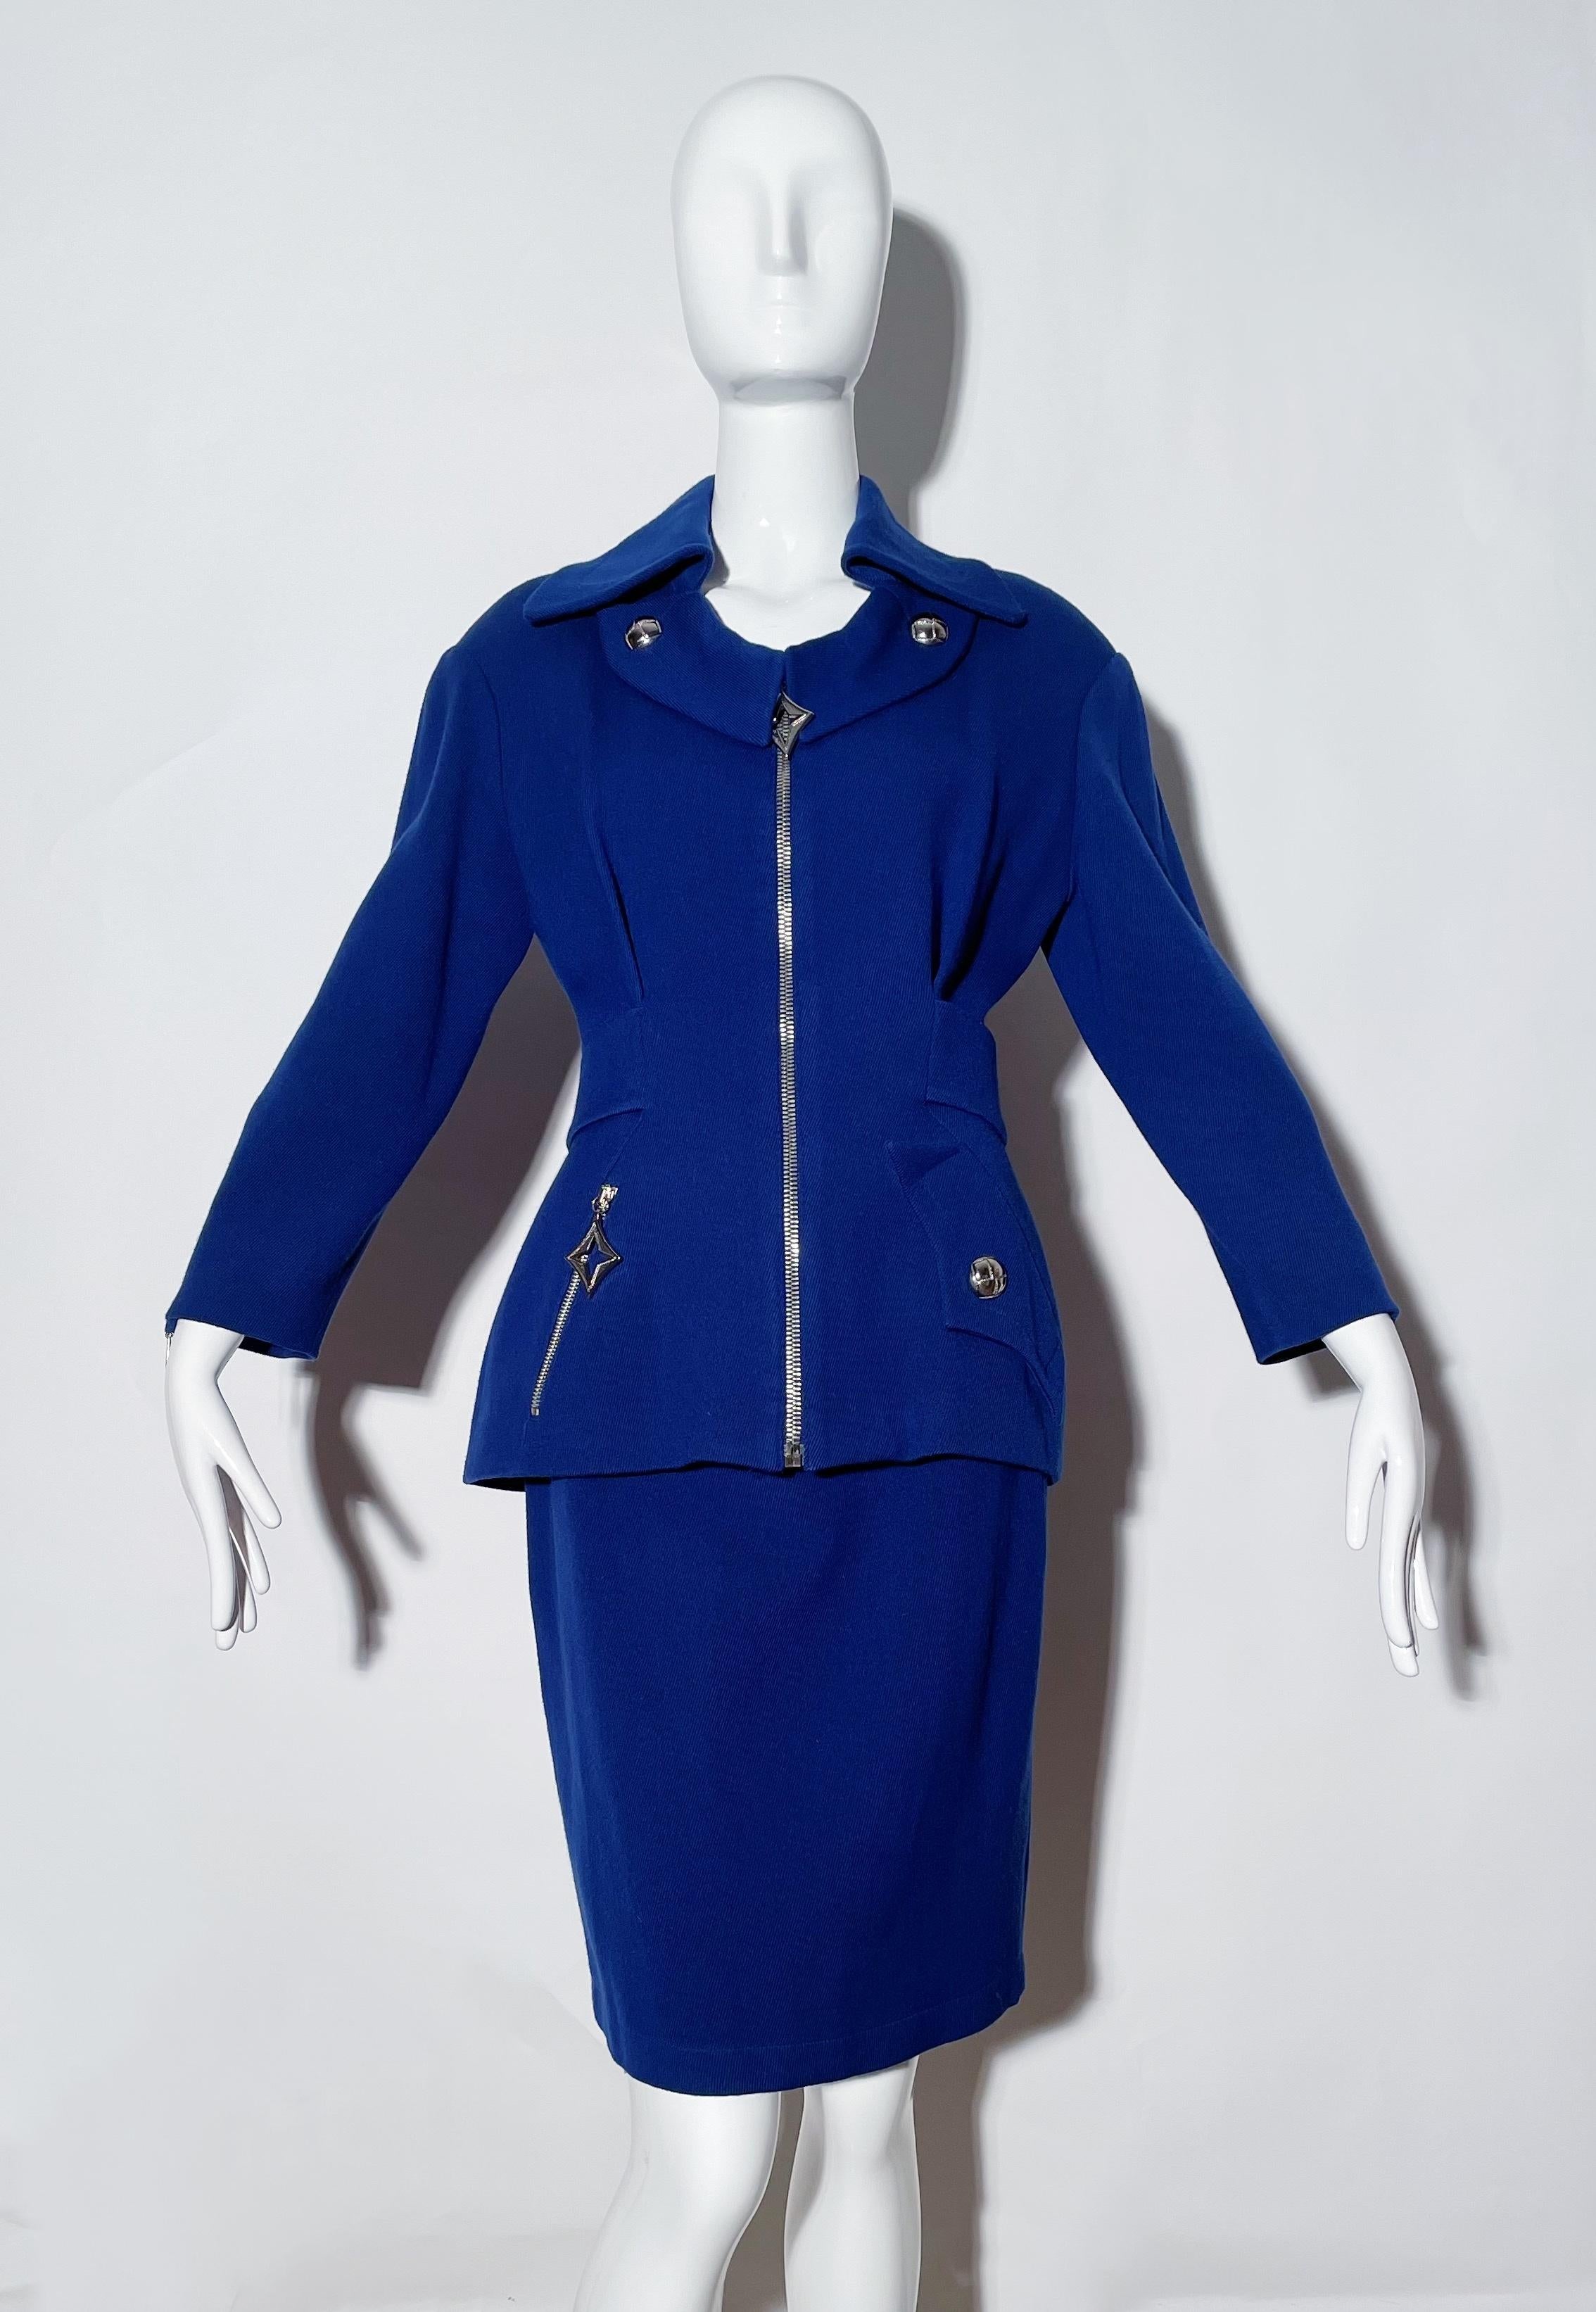 Electric blue skirt suit. Large collar. Front zipper. Front pockets. Belted blazer. Shoulder pads. Rear snap closure on skirt. Rear slit on skirt. Lined. Wool. Made Italy. 
*Condition: Excellent vintage condition. No visible Flaws. Tags have been